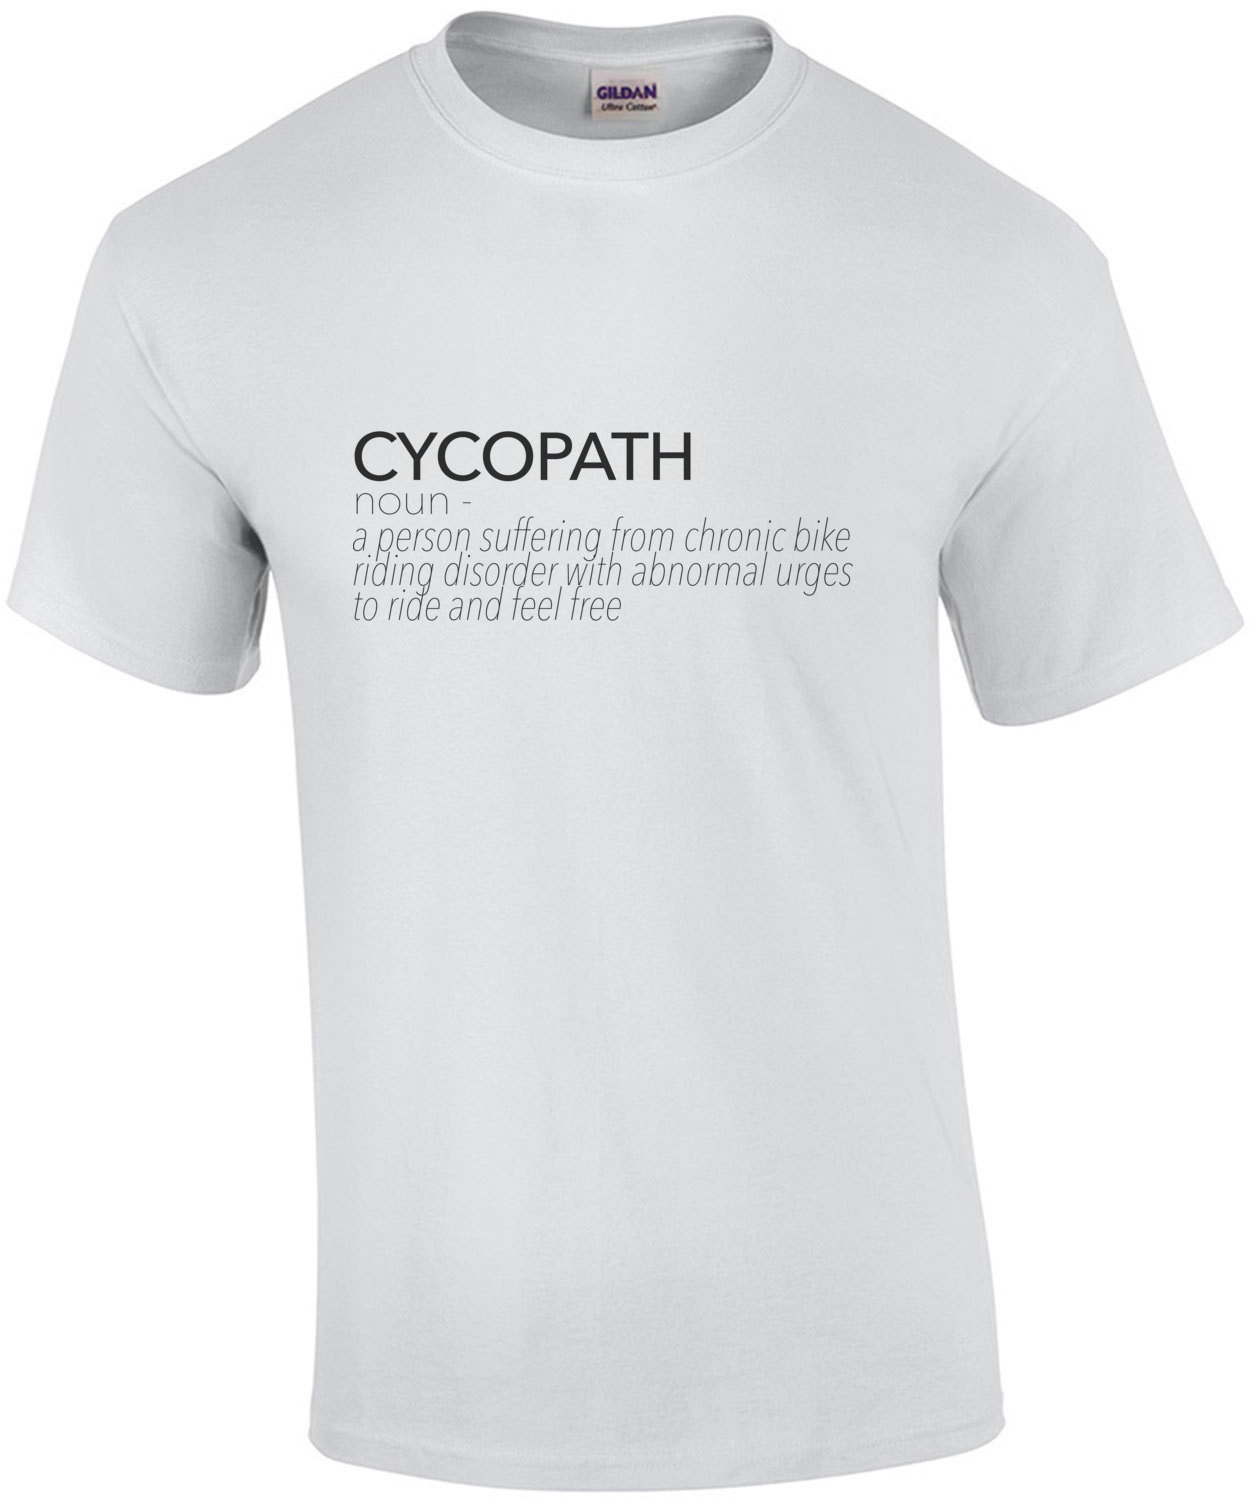 Cycopath - Noun - A person suffering from chronic bike riding disorder with abnormal urges to ride and feel free. Funny bike bicycle t-shirt 